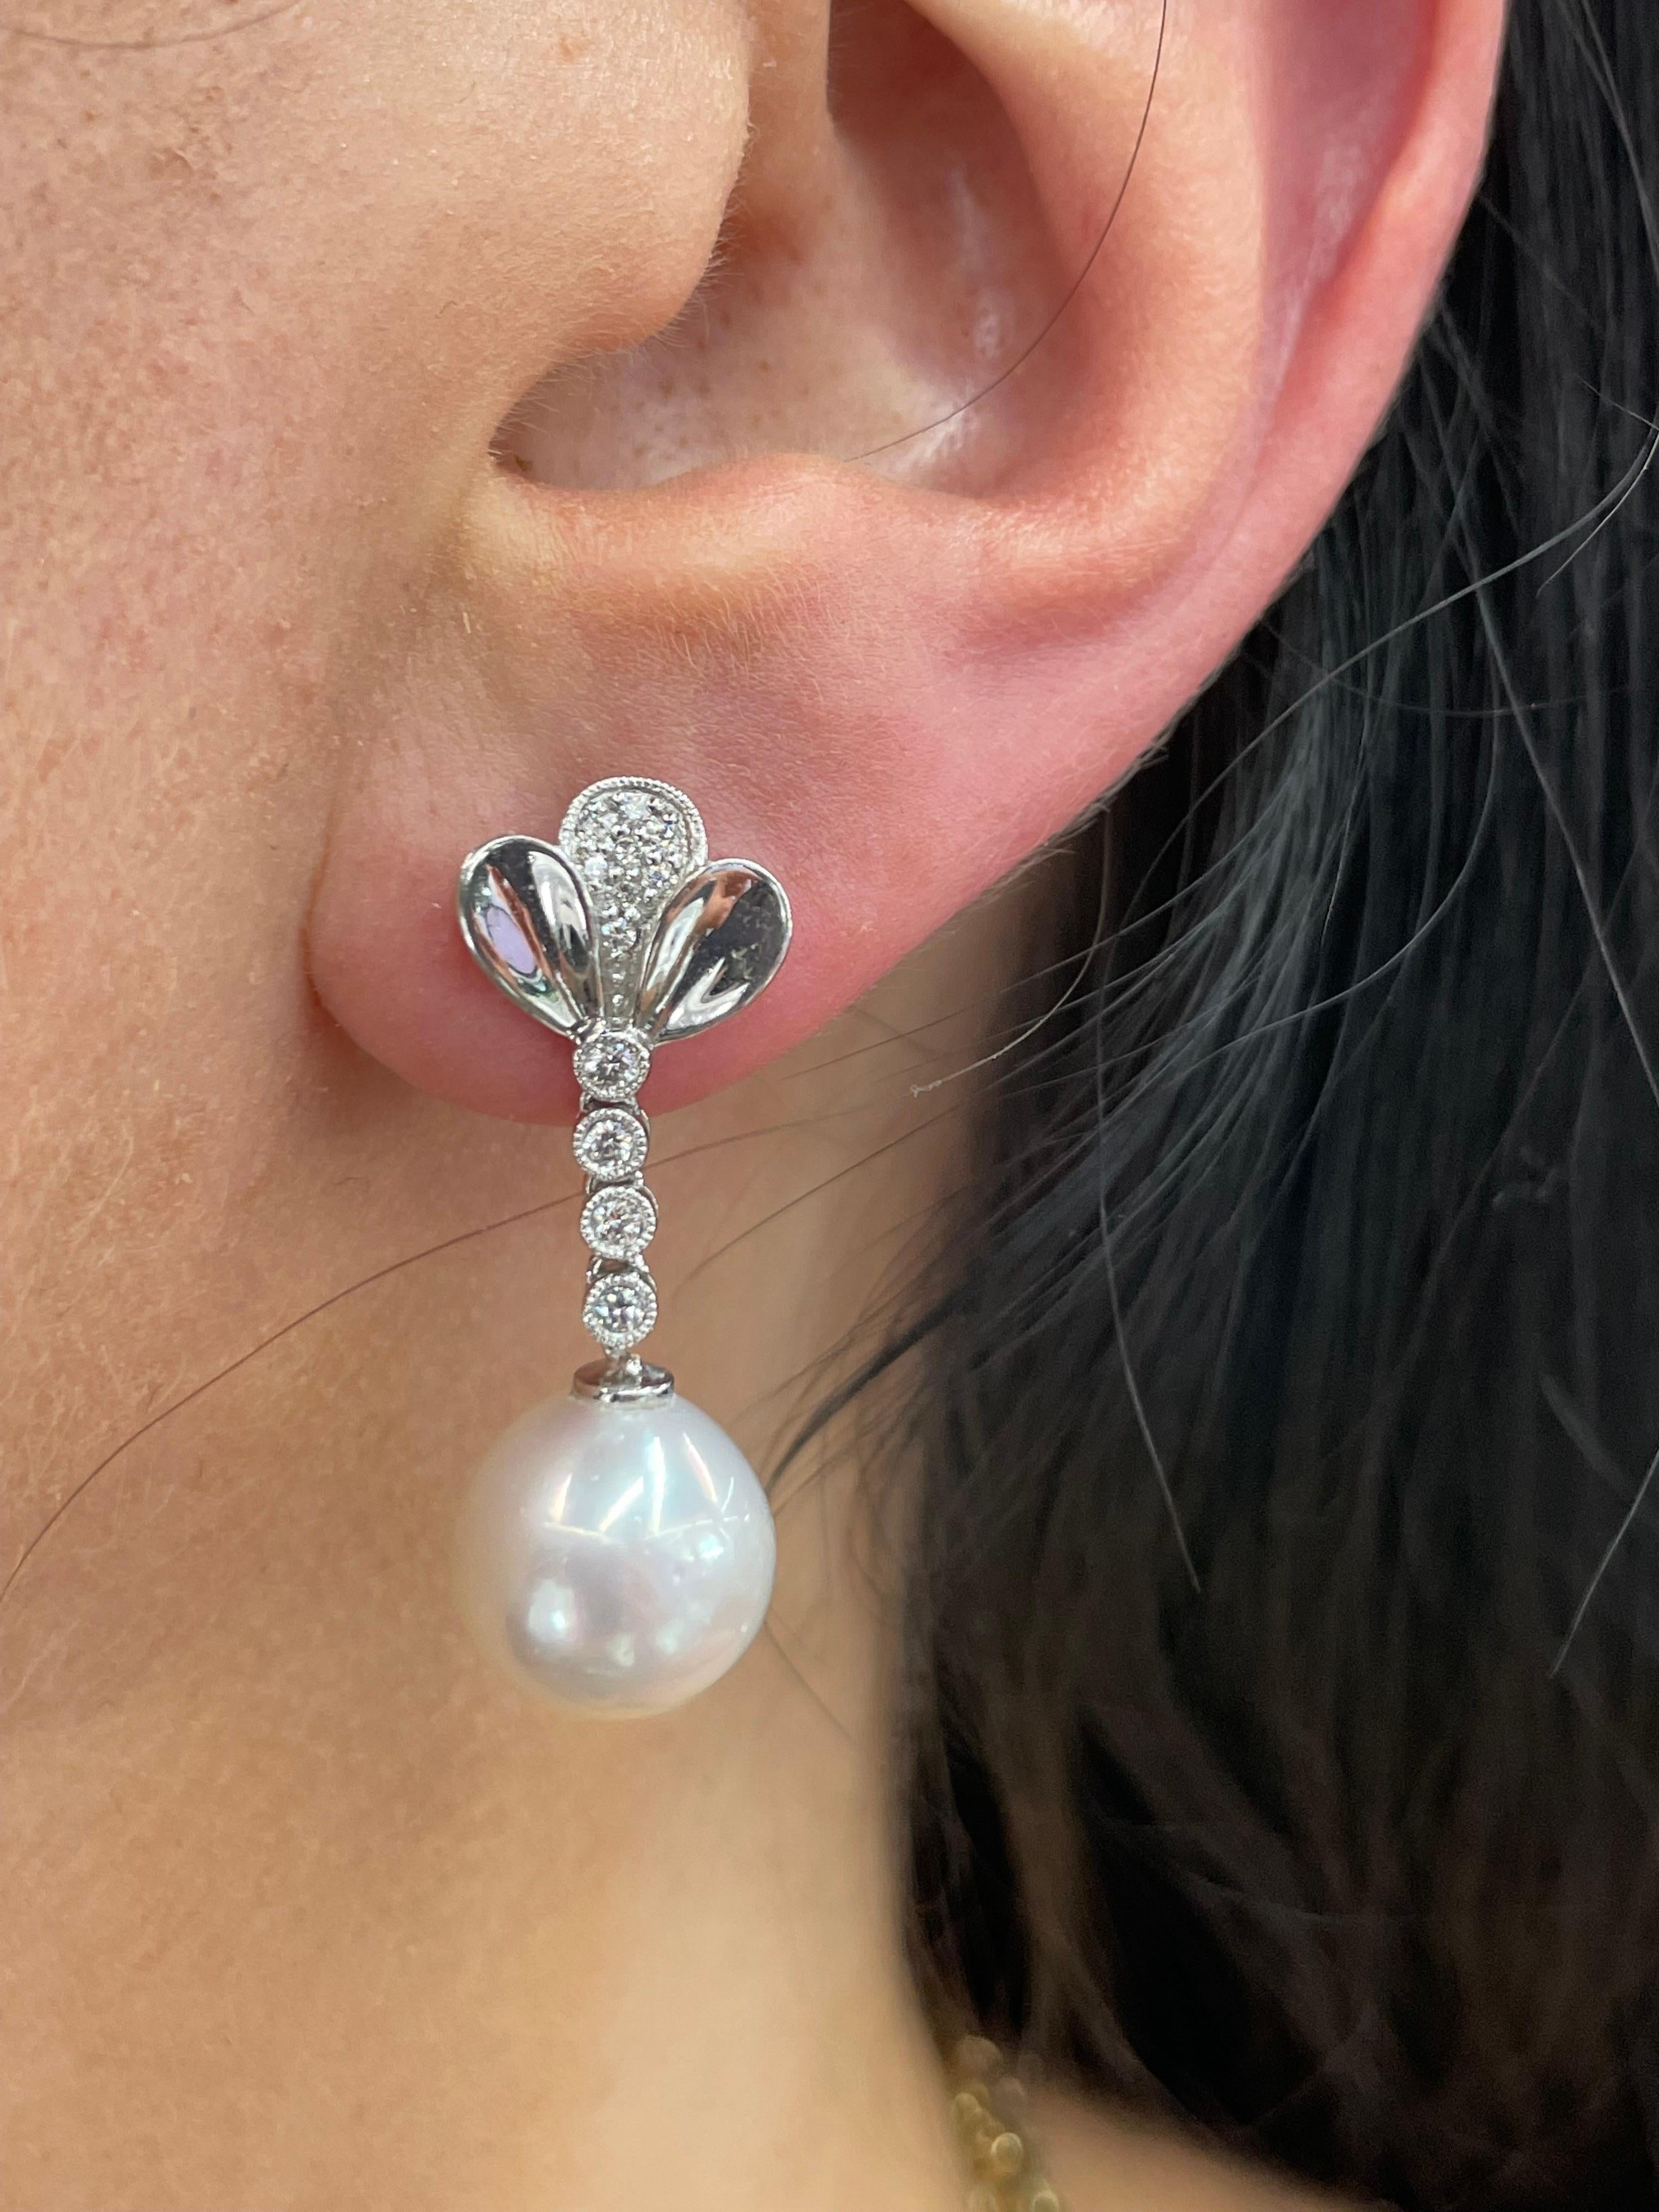 14 Karat White Gold floral motif drop earrings featuring 24 round brilliants weighing 0.24 carats and two South Sea Pearls measuring 11-12 MM.
Color G-H
Clarity SI

Comes in different gold & pearl colors.
DM for more information. 